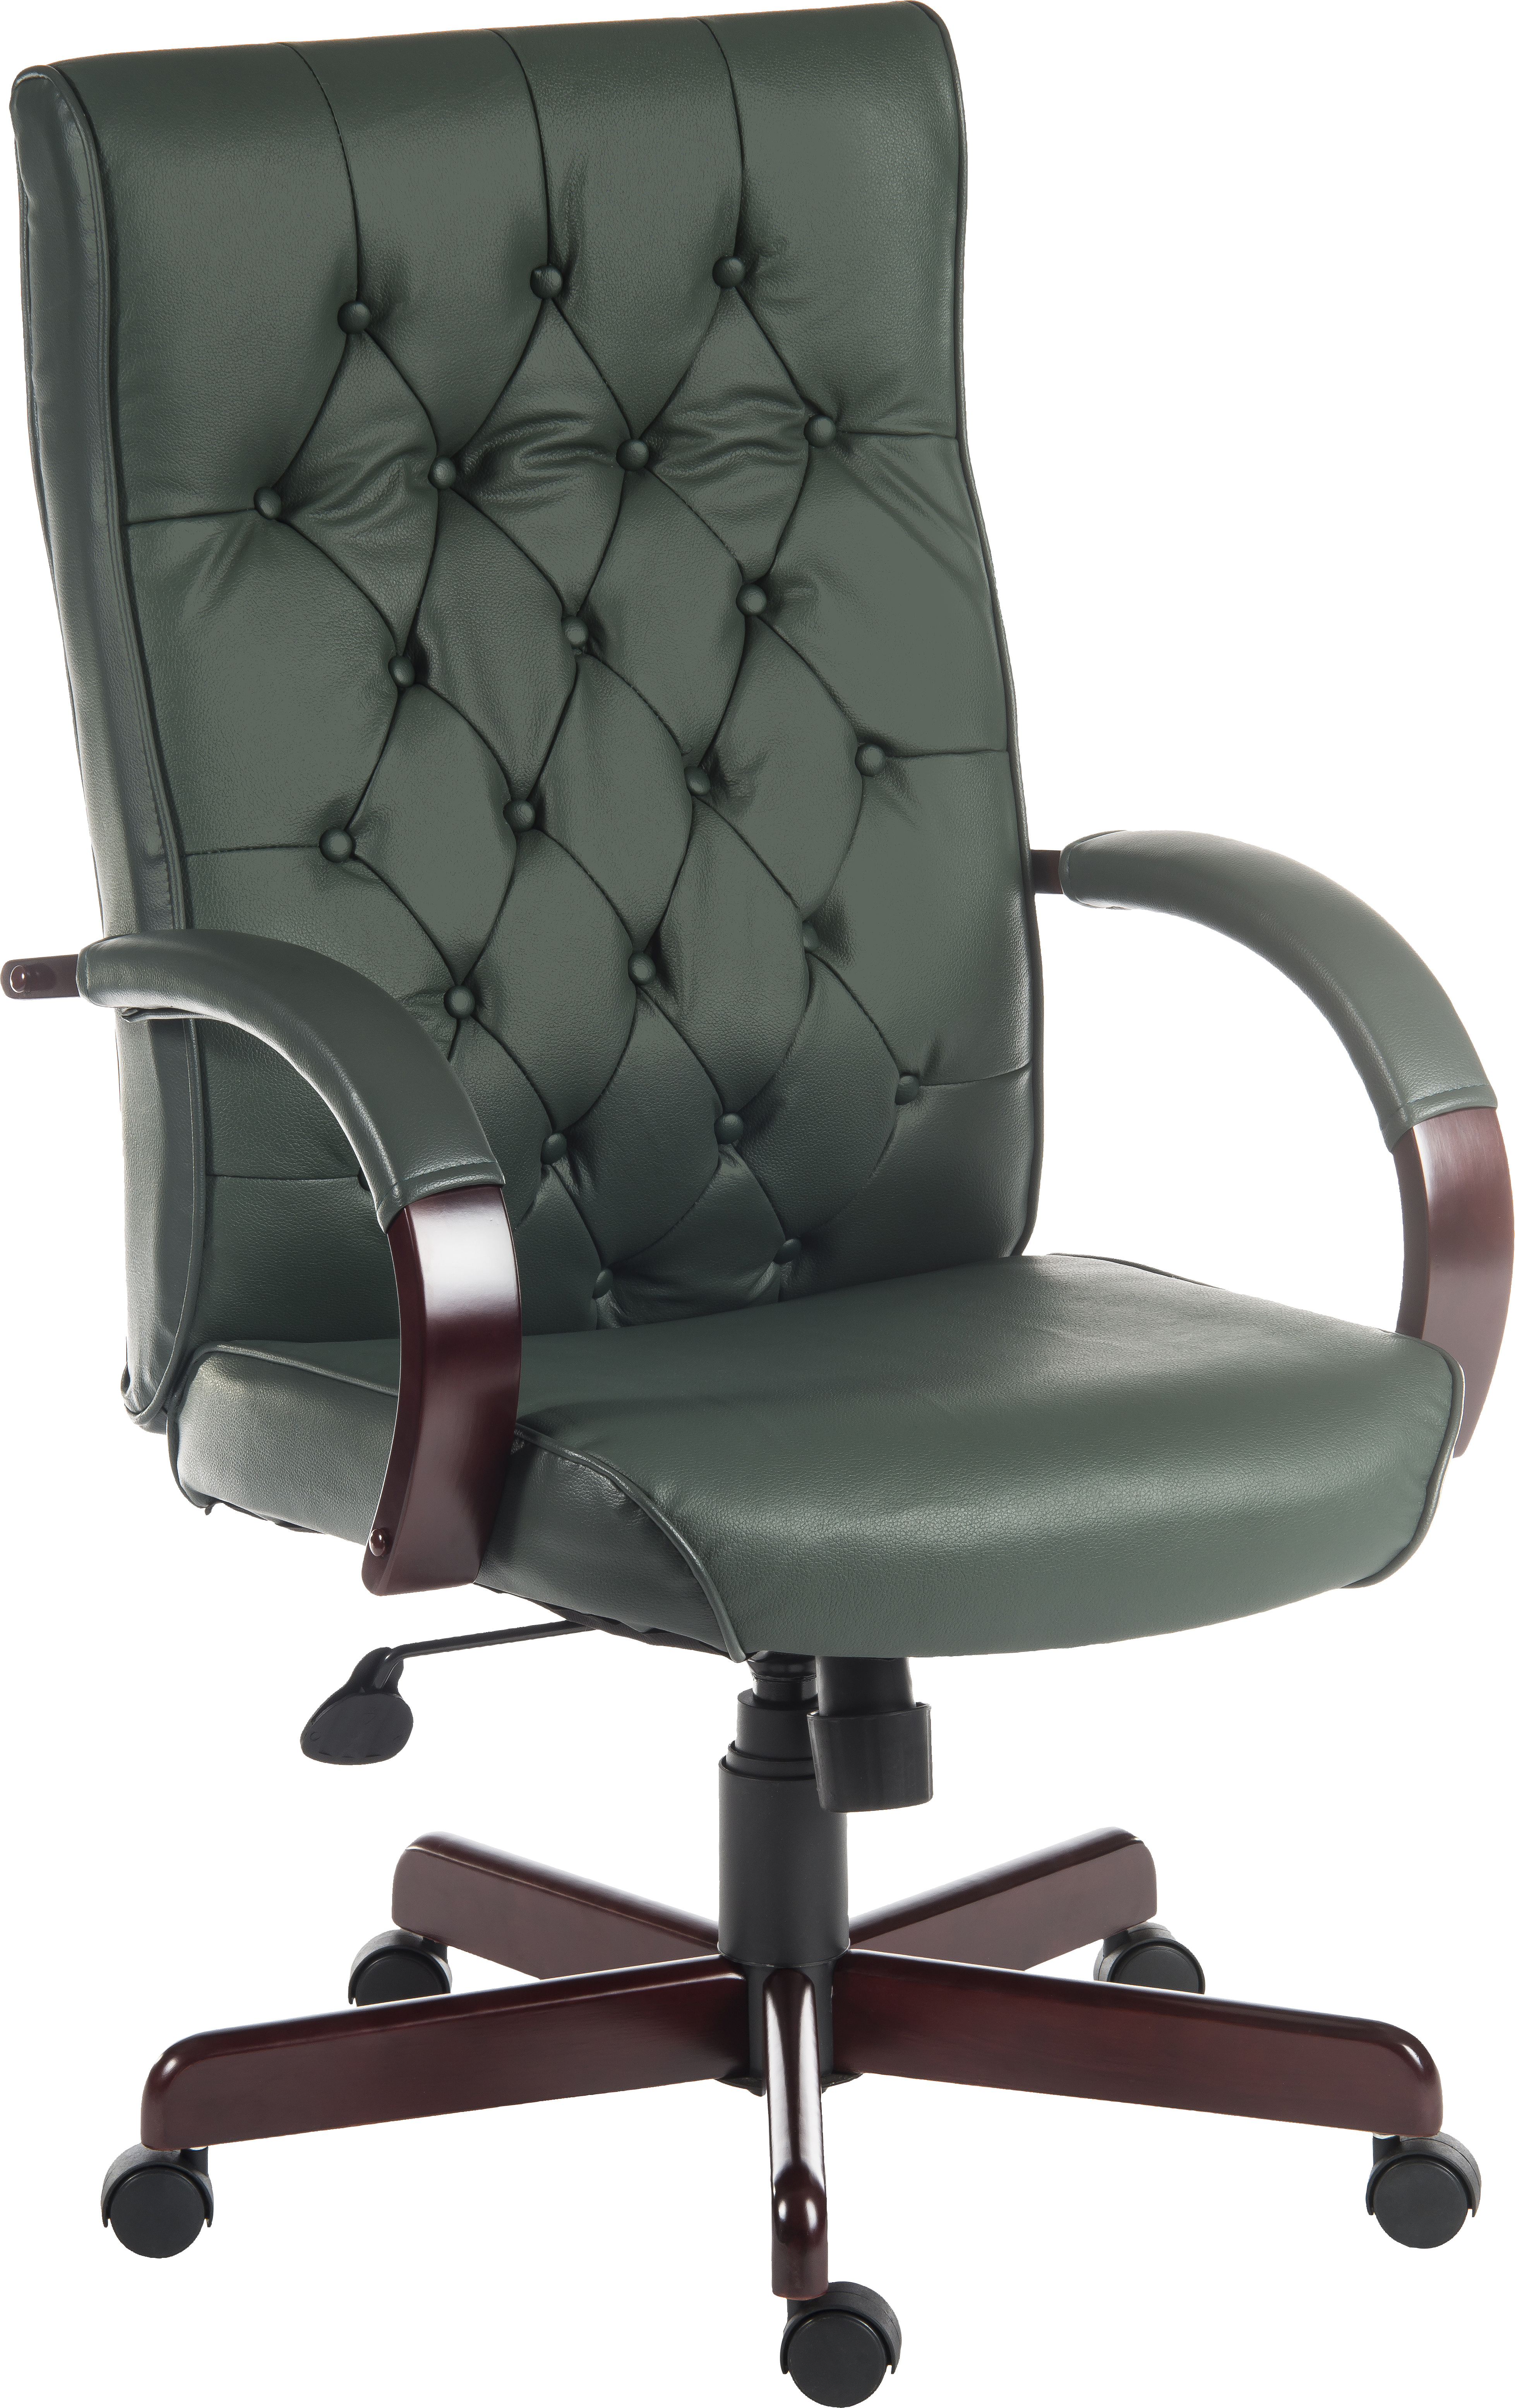 Warwick Antique Style Bonded Leather Faced Executive Office Chair Green B8501GR